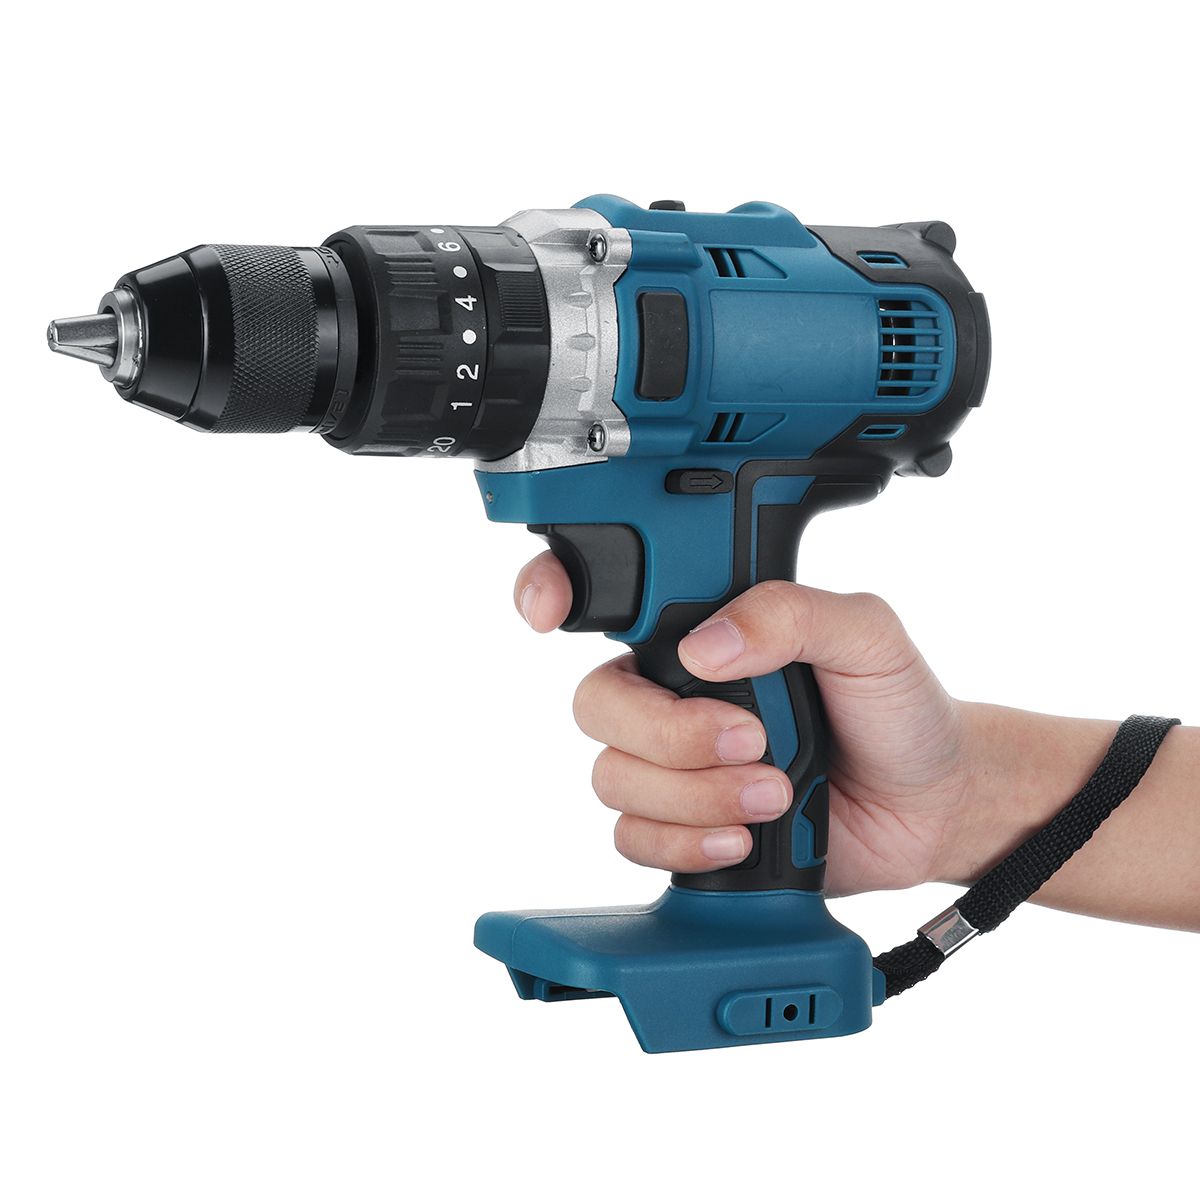 18V-95Nm-Cordless-Impact-Drill-2-Speeds-Electric-Screwdriver-For-18V-Makita-Battery-1656476